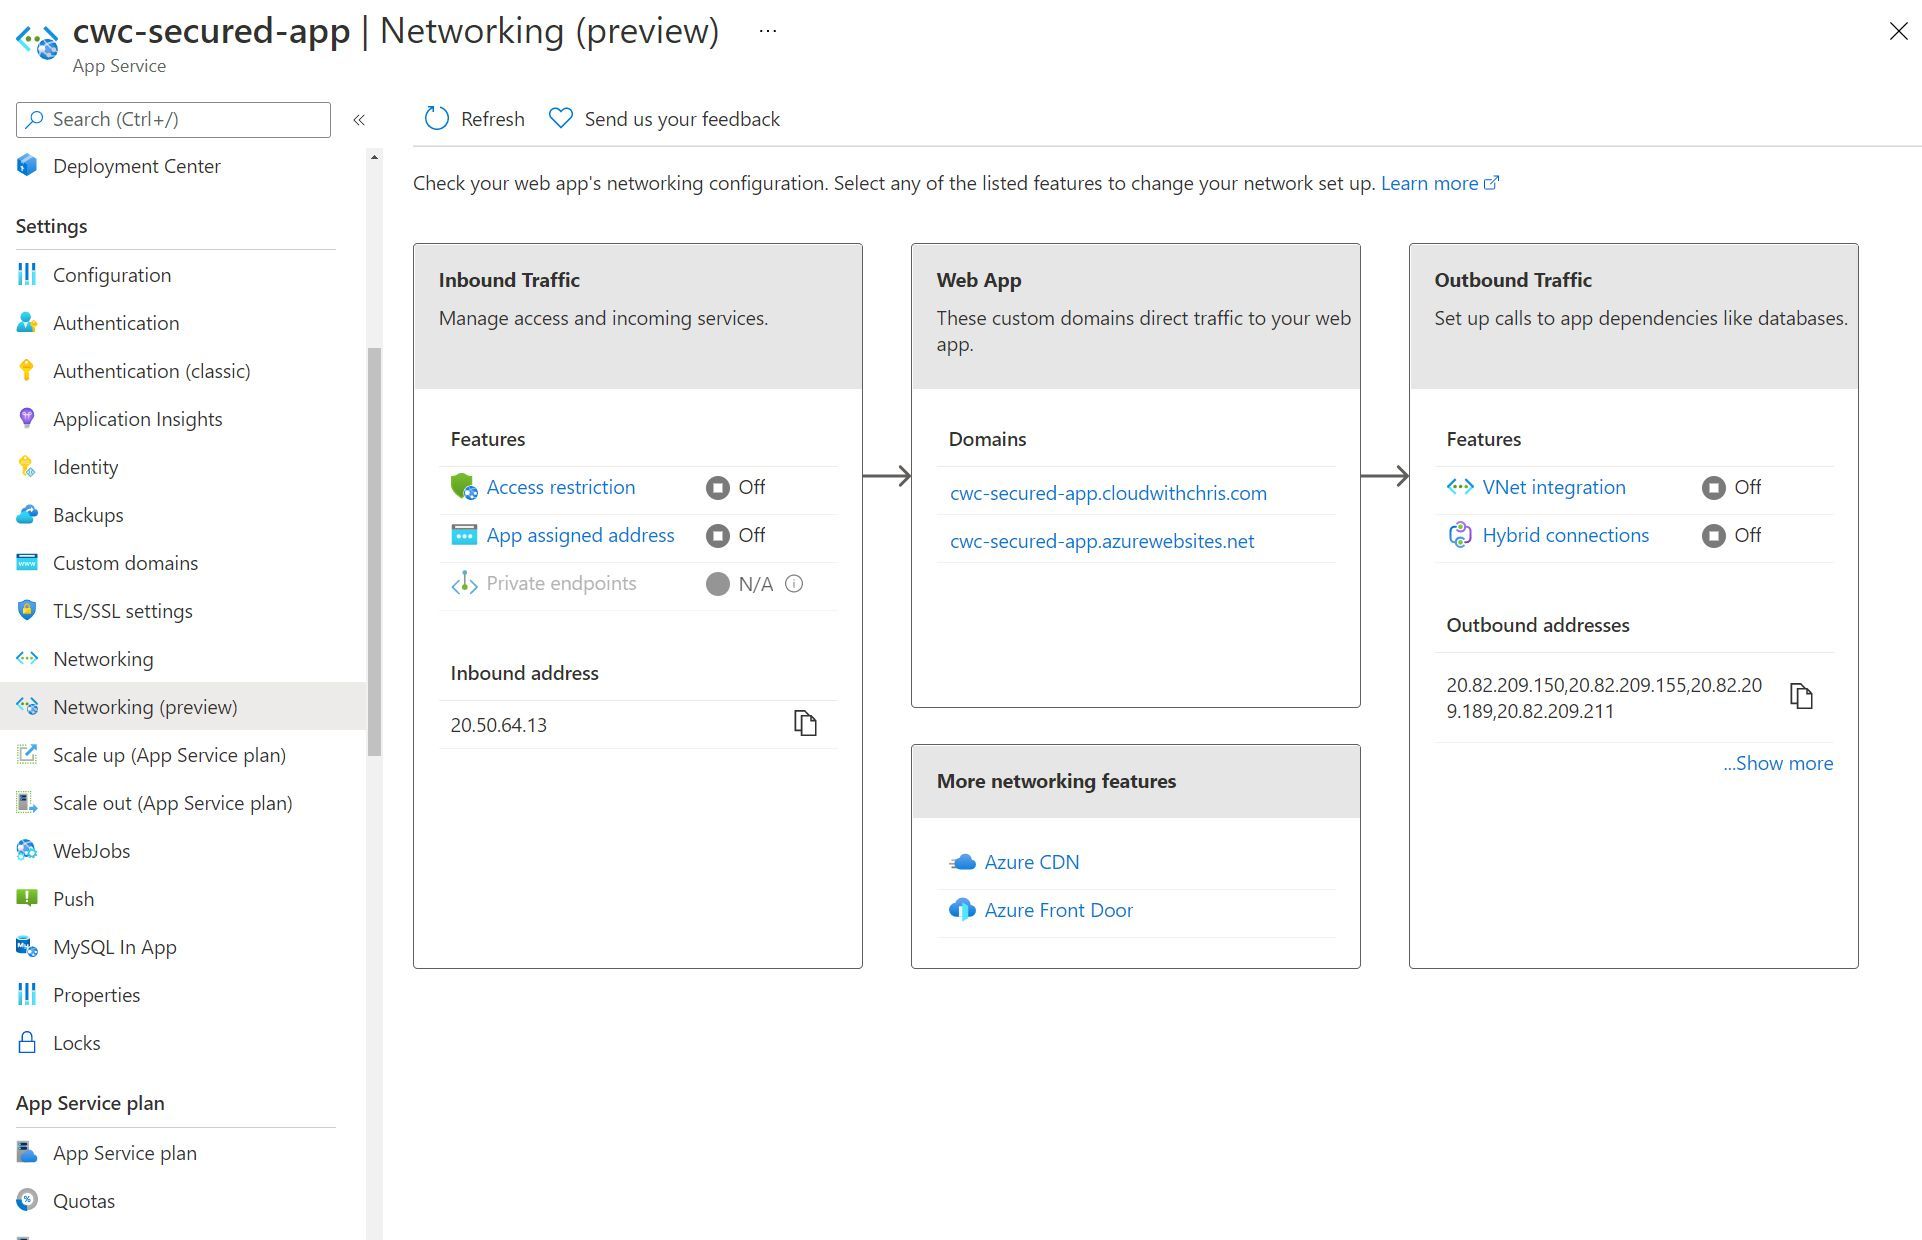 Screenshot showing the Networking (preview) UI within the App Service that we have been working on